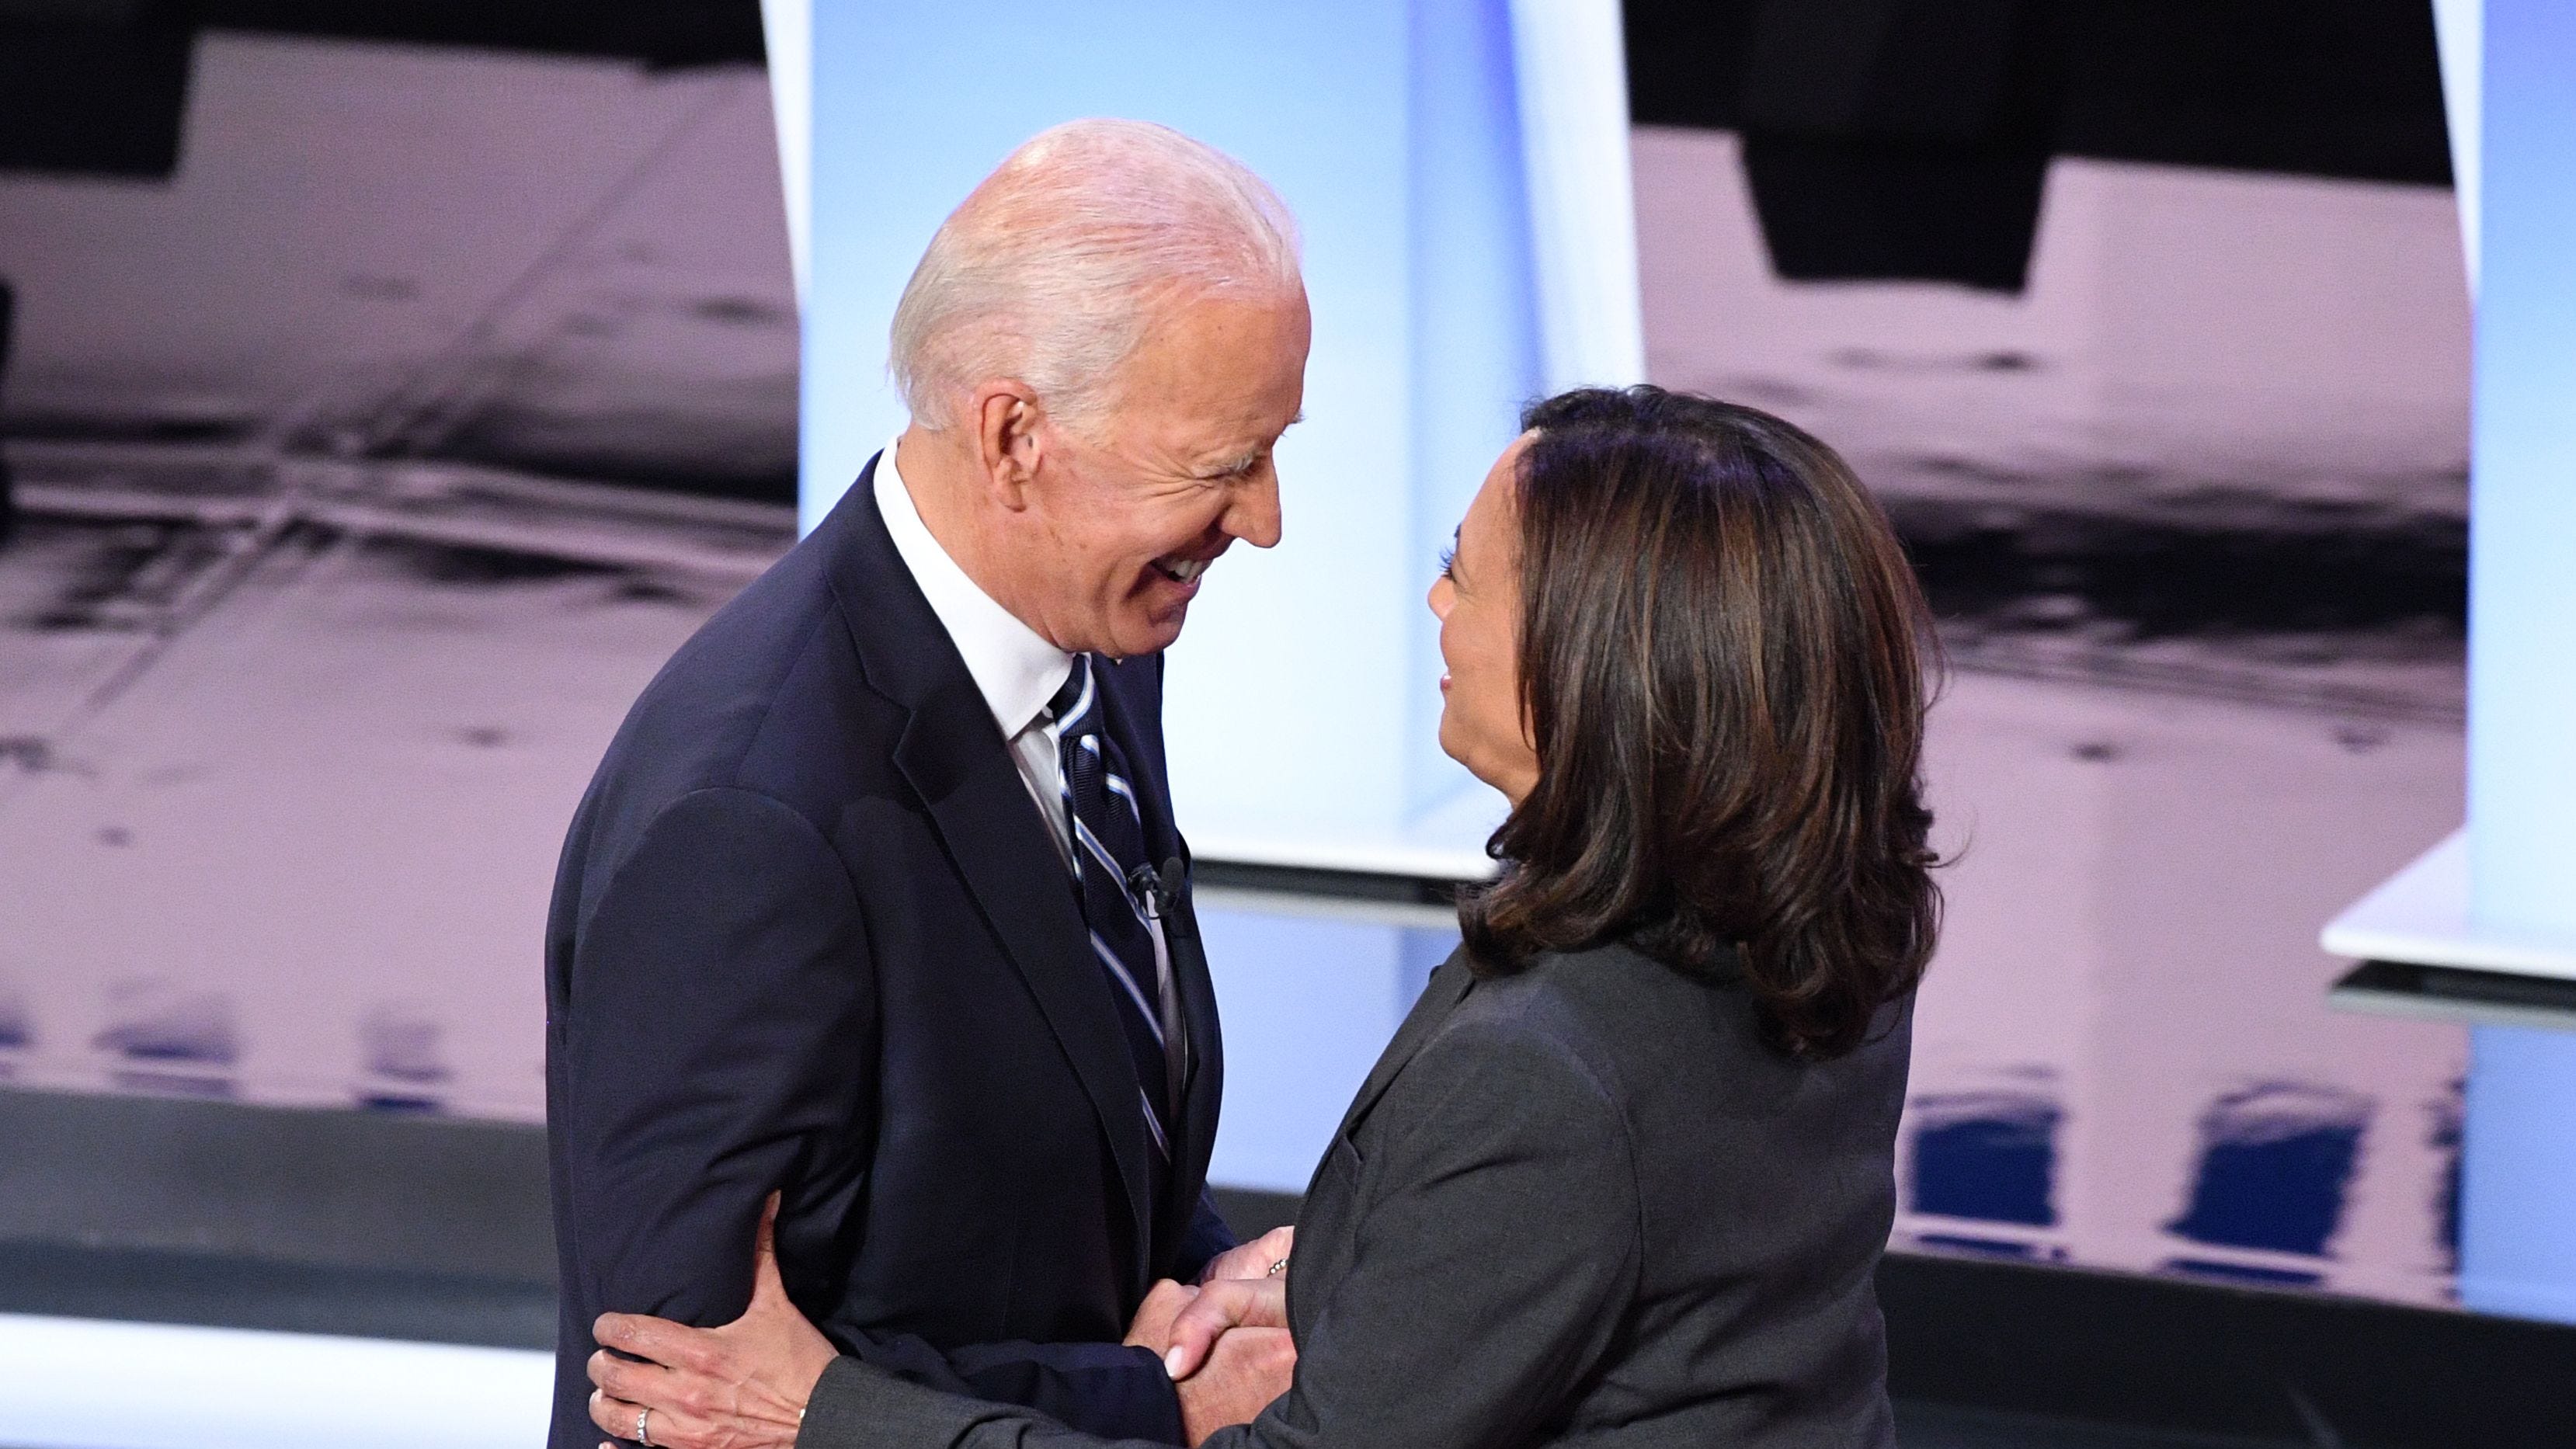 AFP_1J87ZG.jpg Democratic presidential hopefuls former Vice President Joe Biden (L) and US Senator from California Kamala Harris greet each other ahead of the second round of the second Democratic primary debate of the 2020 presidential campaign season hosted by CNN at the Fox Theatre in Detroit, Michigan on July 31, 2019. (Photo by Jim WATSON / AFP)JIM WATSON/AFP/Getty Images